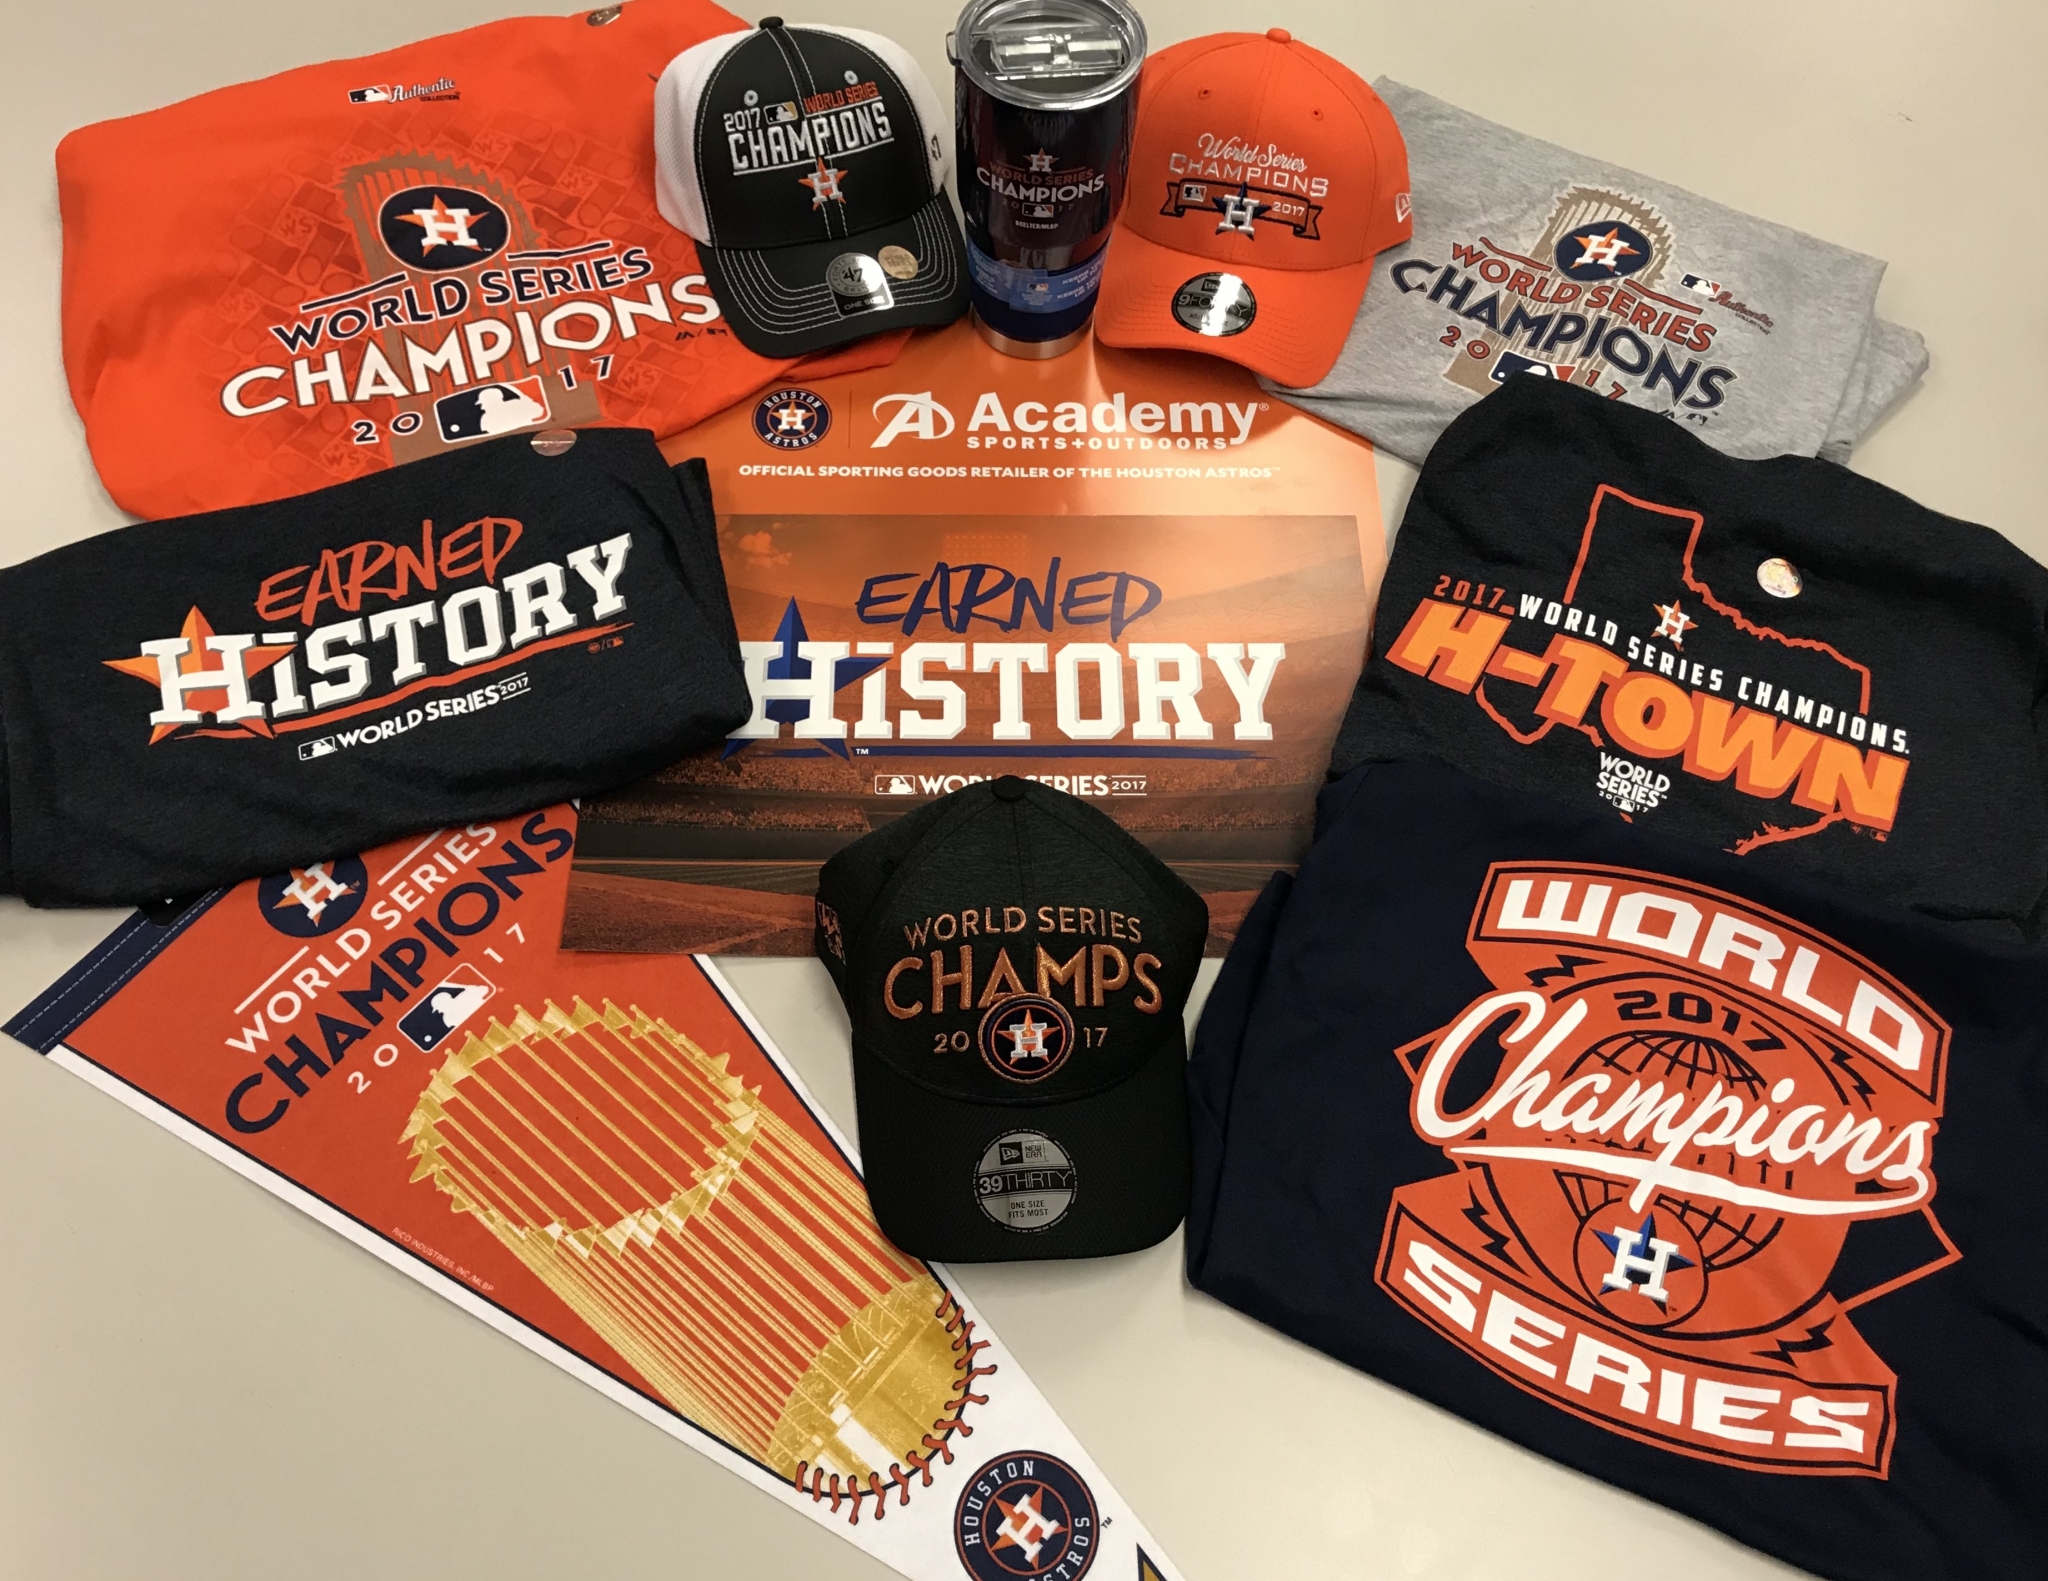 Where to buy Astros World Series championship apparel